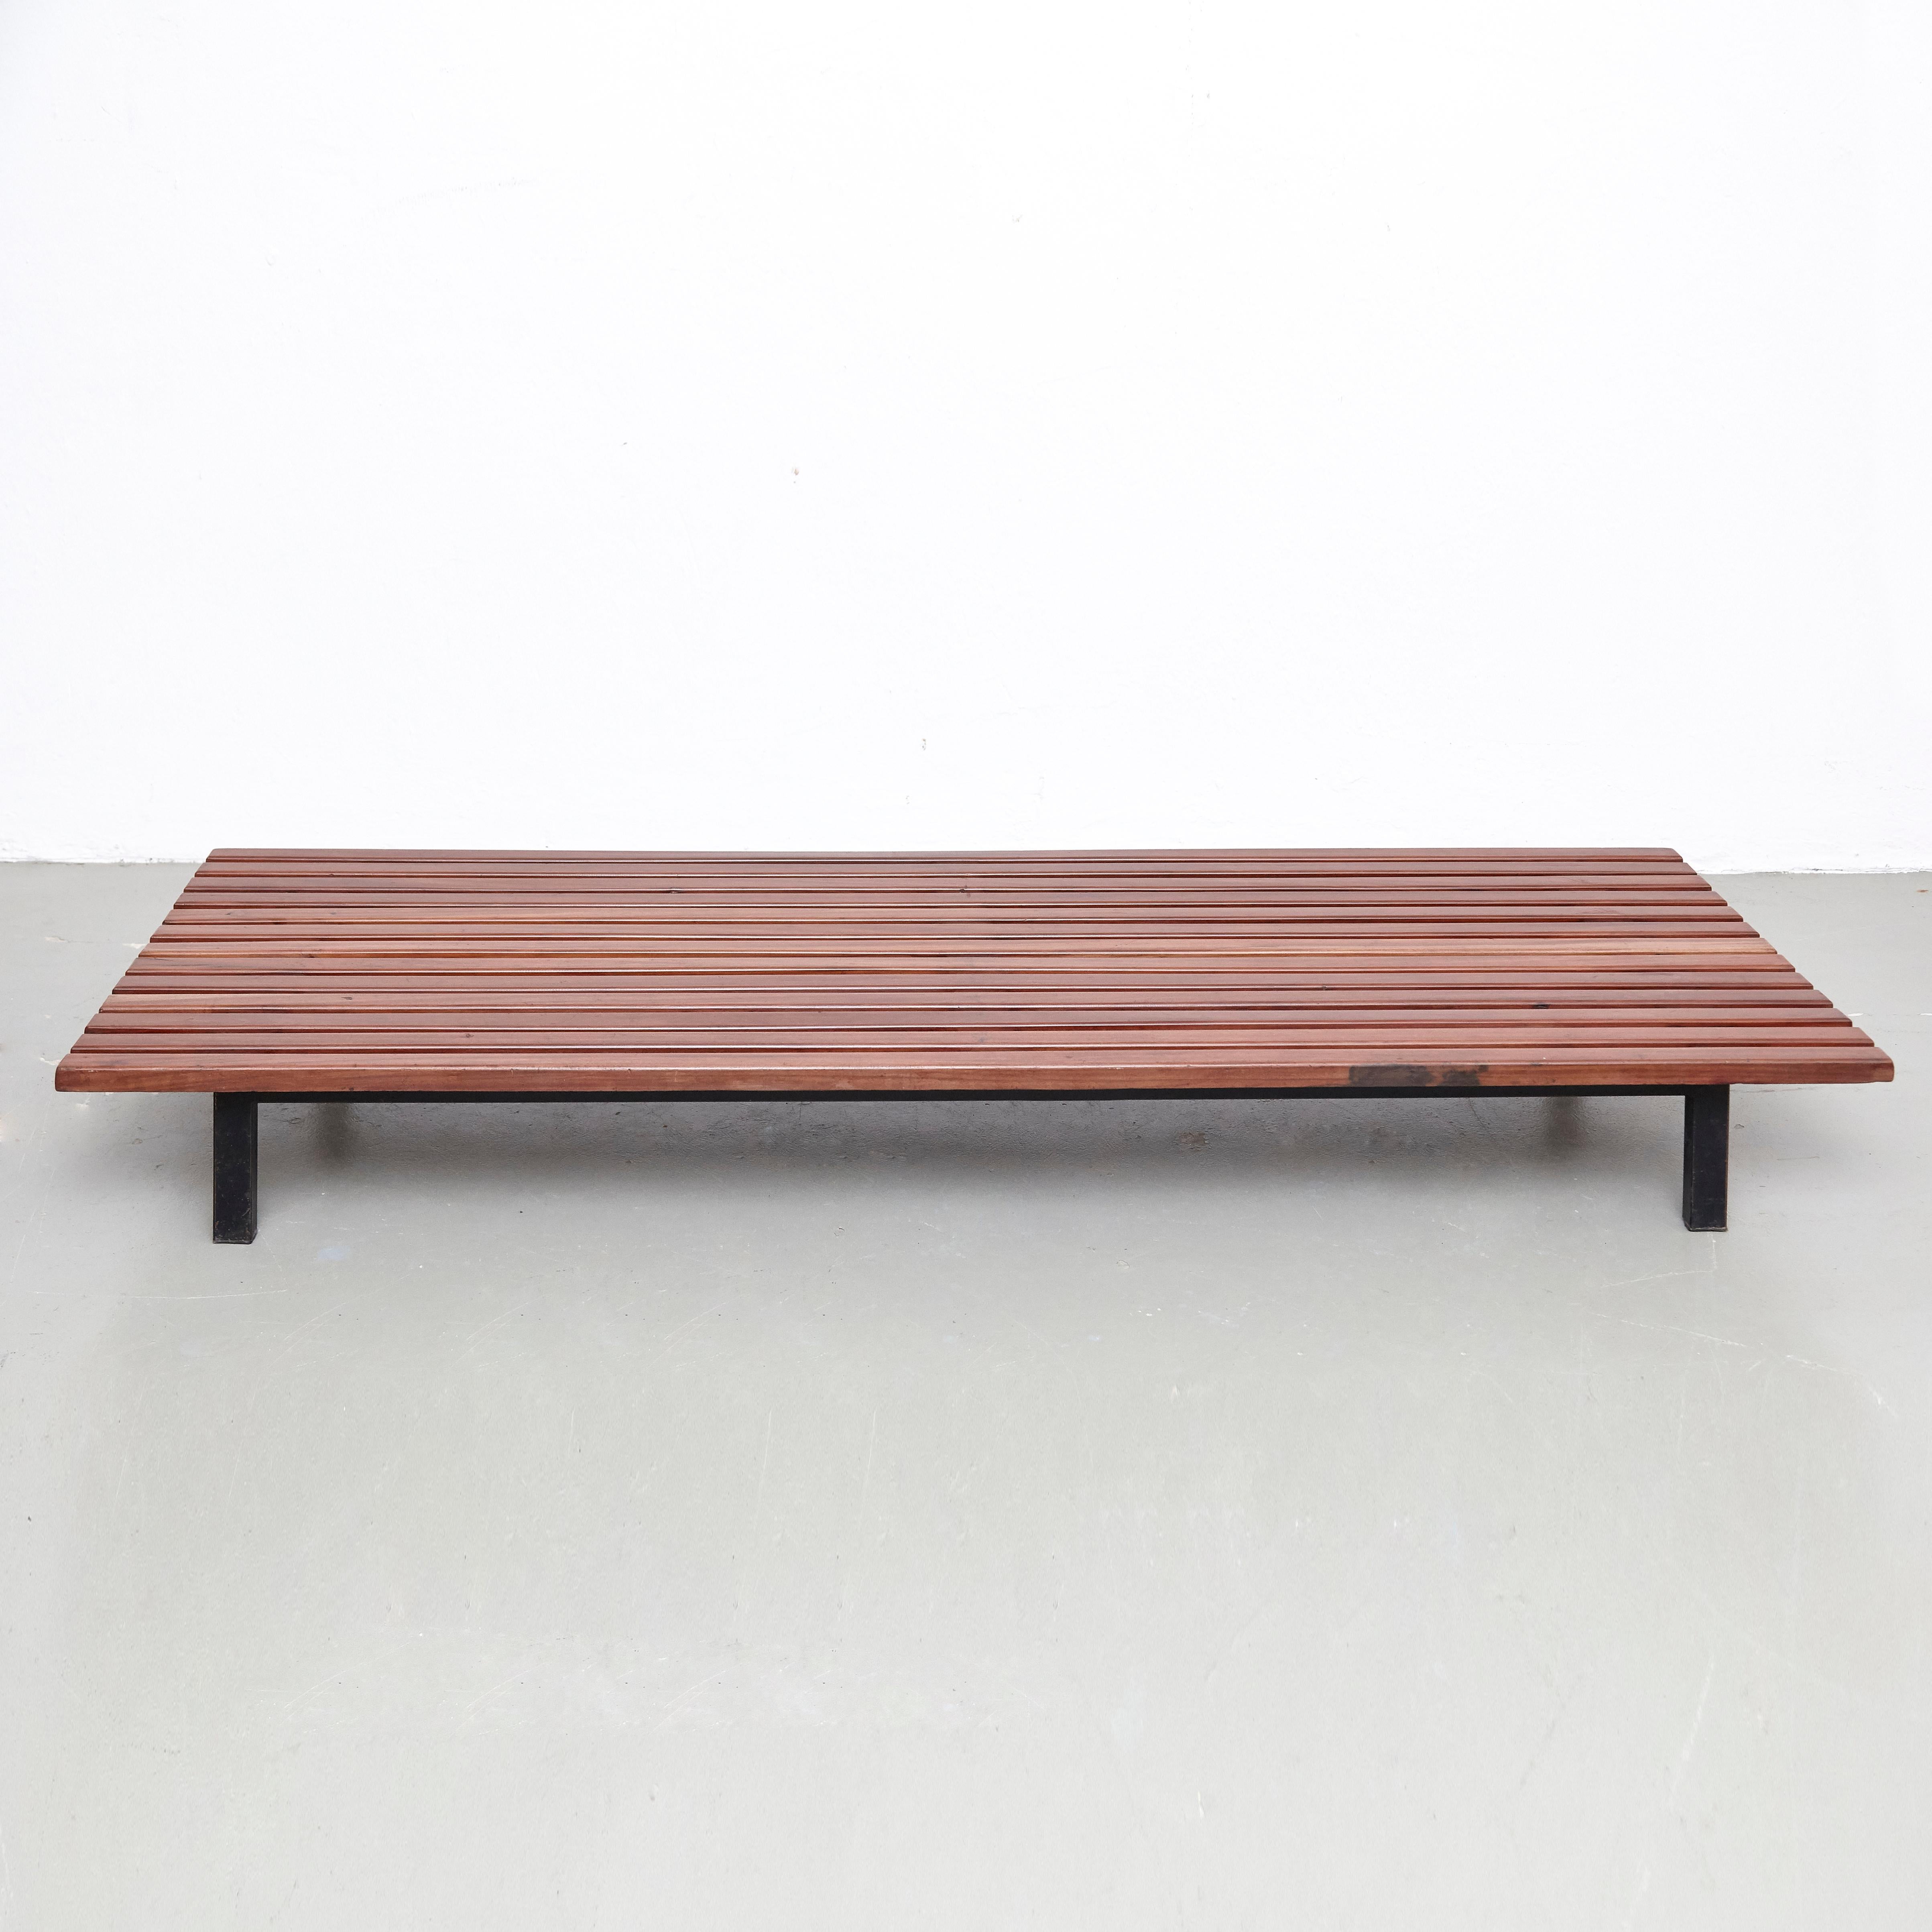 Bench designed by Charlotte Perriand, circa 1950.
Manufactured by Steph Simon (France) circa 1950.
Wood, lacquered metal frame and legs.

Provenance: Cansado, Mauritania (Africa).

In original condition, with minor wear consistent with age and